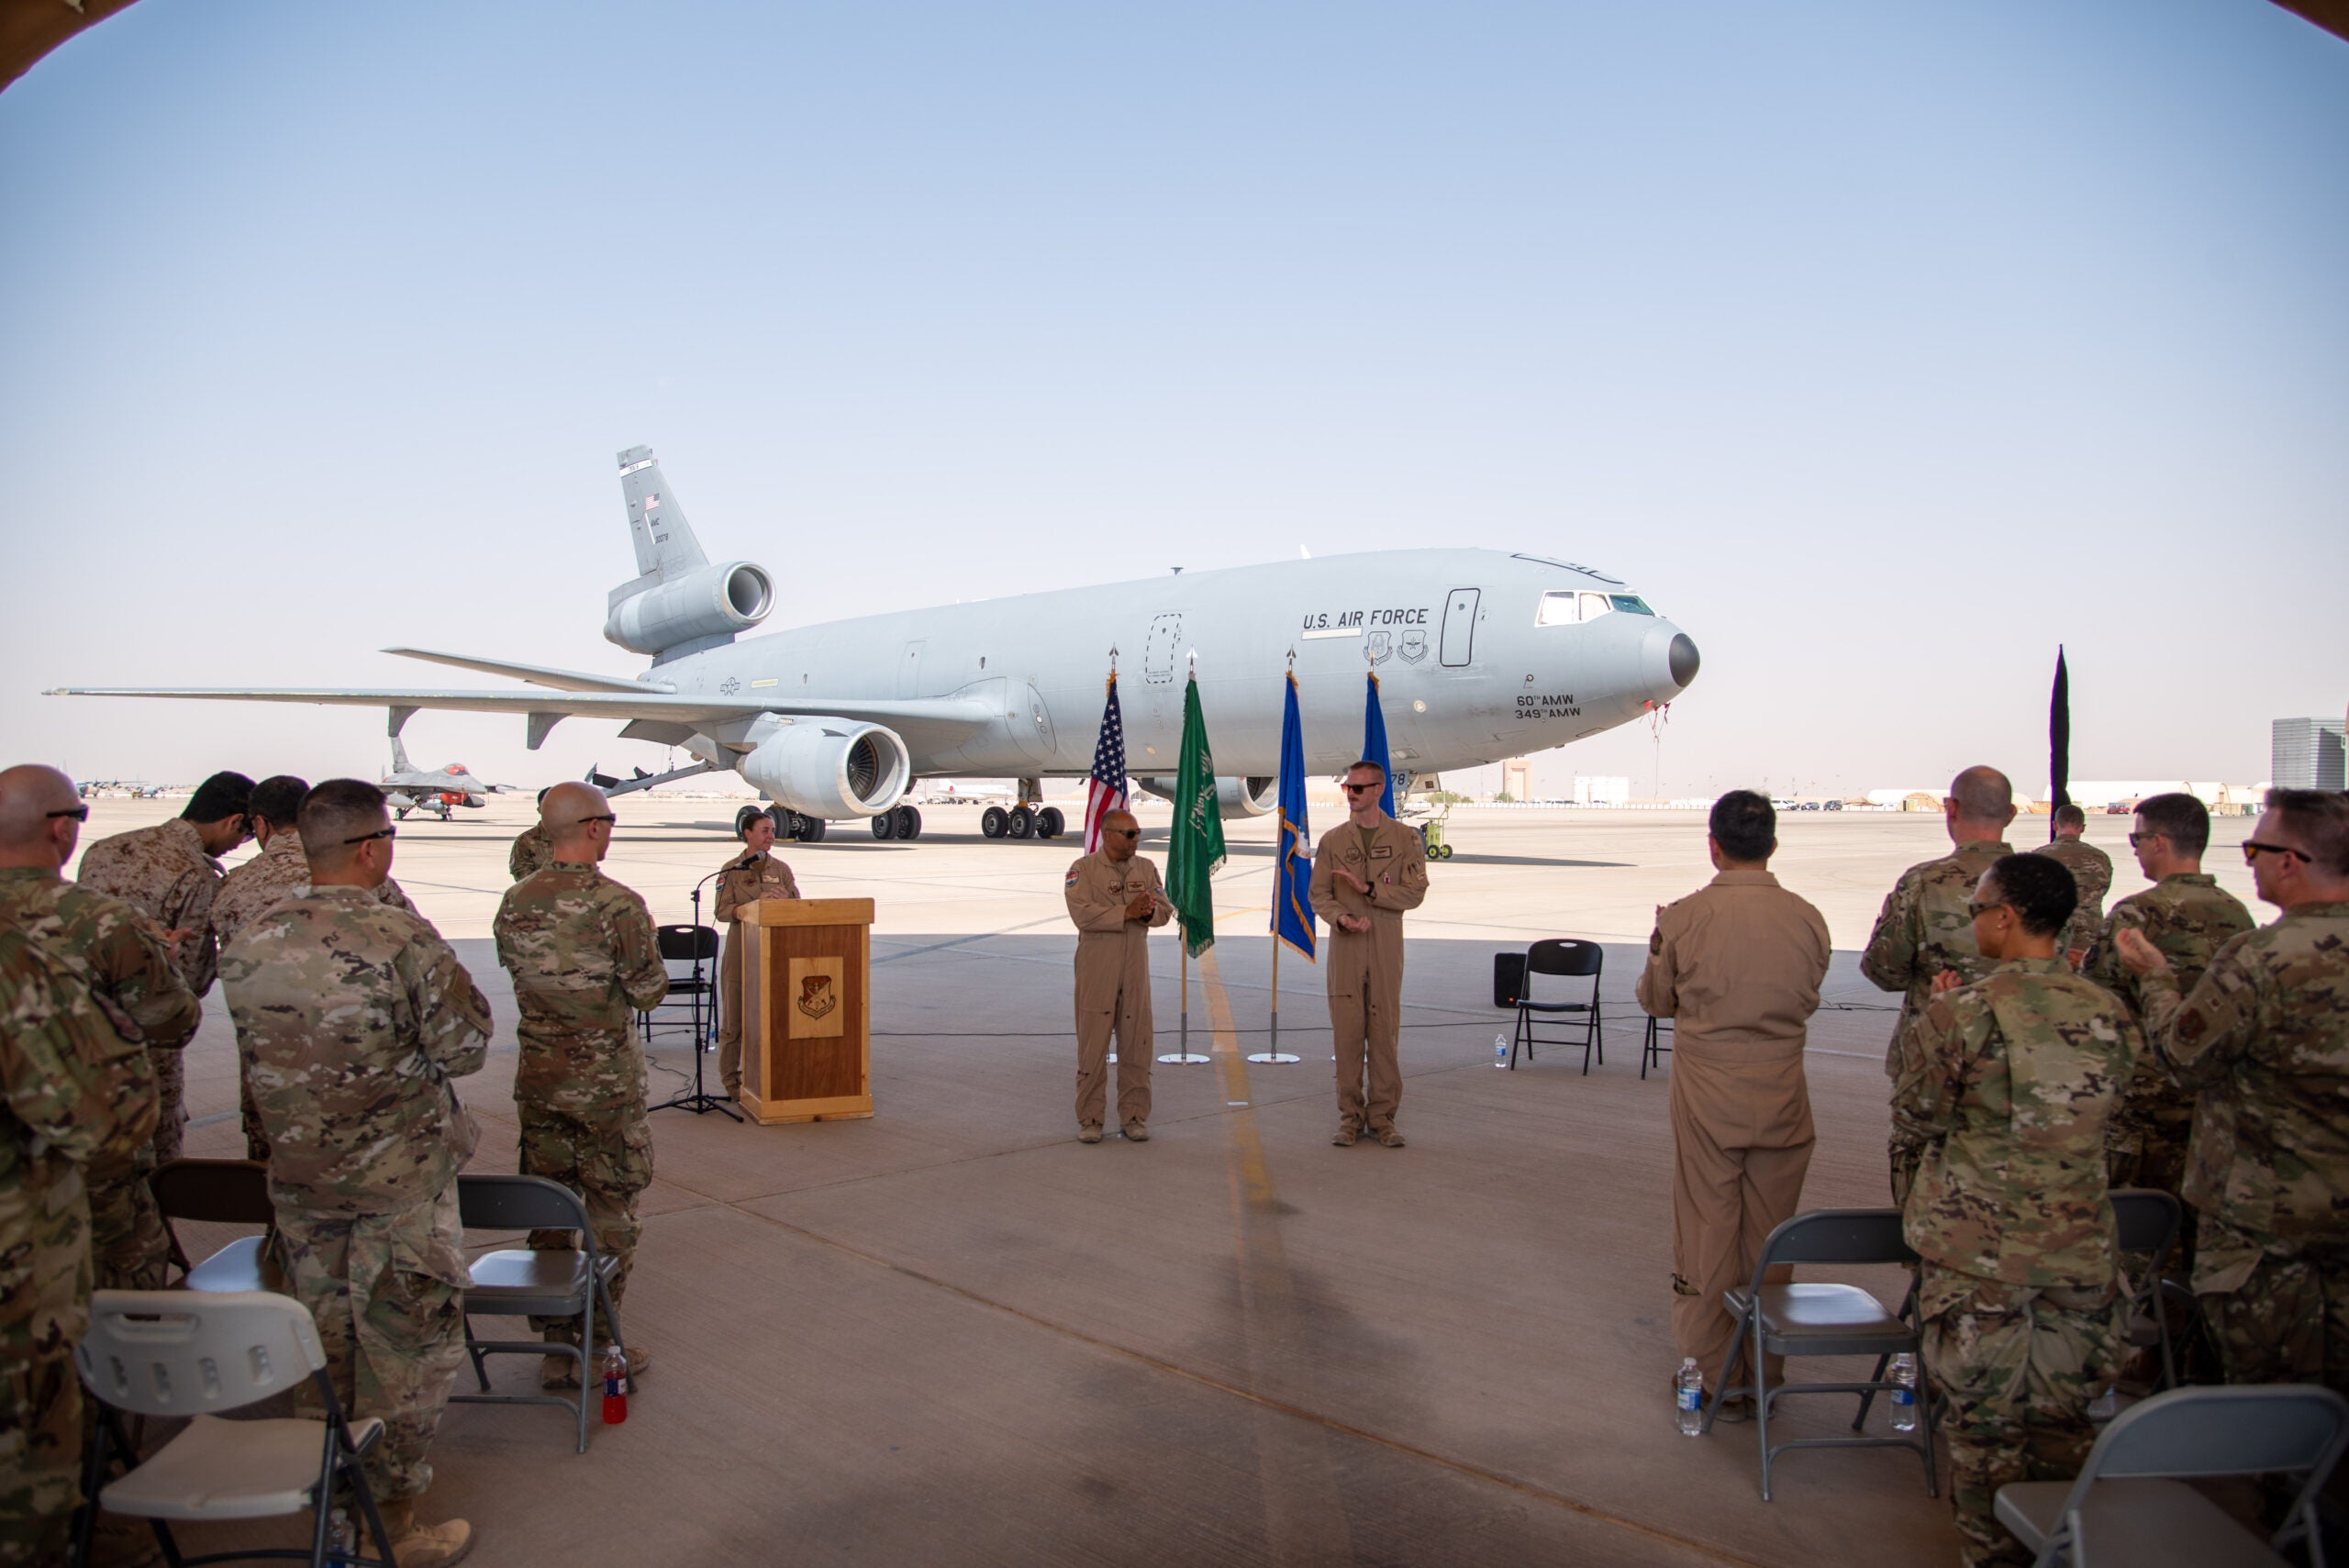 U.S. Airmen from the 378th Air Expeditionary Wing celebrate after an inactivation ceremony for the 908th Expeditionary Air Refueling Squadron at Prince Sultan Air Base, Kingdom of Saudi Arabia, Oct. 4, 2023. The ceremony highlighted the legacy of the KC-10 after over 30 years of service within the U.S. Air Forces Central (AFCENT) Area of Responsibility. By September 2024, the U.S. Air Force's fleet of KC-10s will be decommissioned and gradually replaced by the KC-46 aircraft. (U.S. Air Force photo by Tech. Sgt. Alexander Frank)